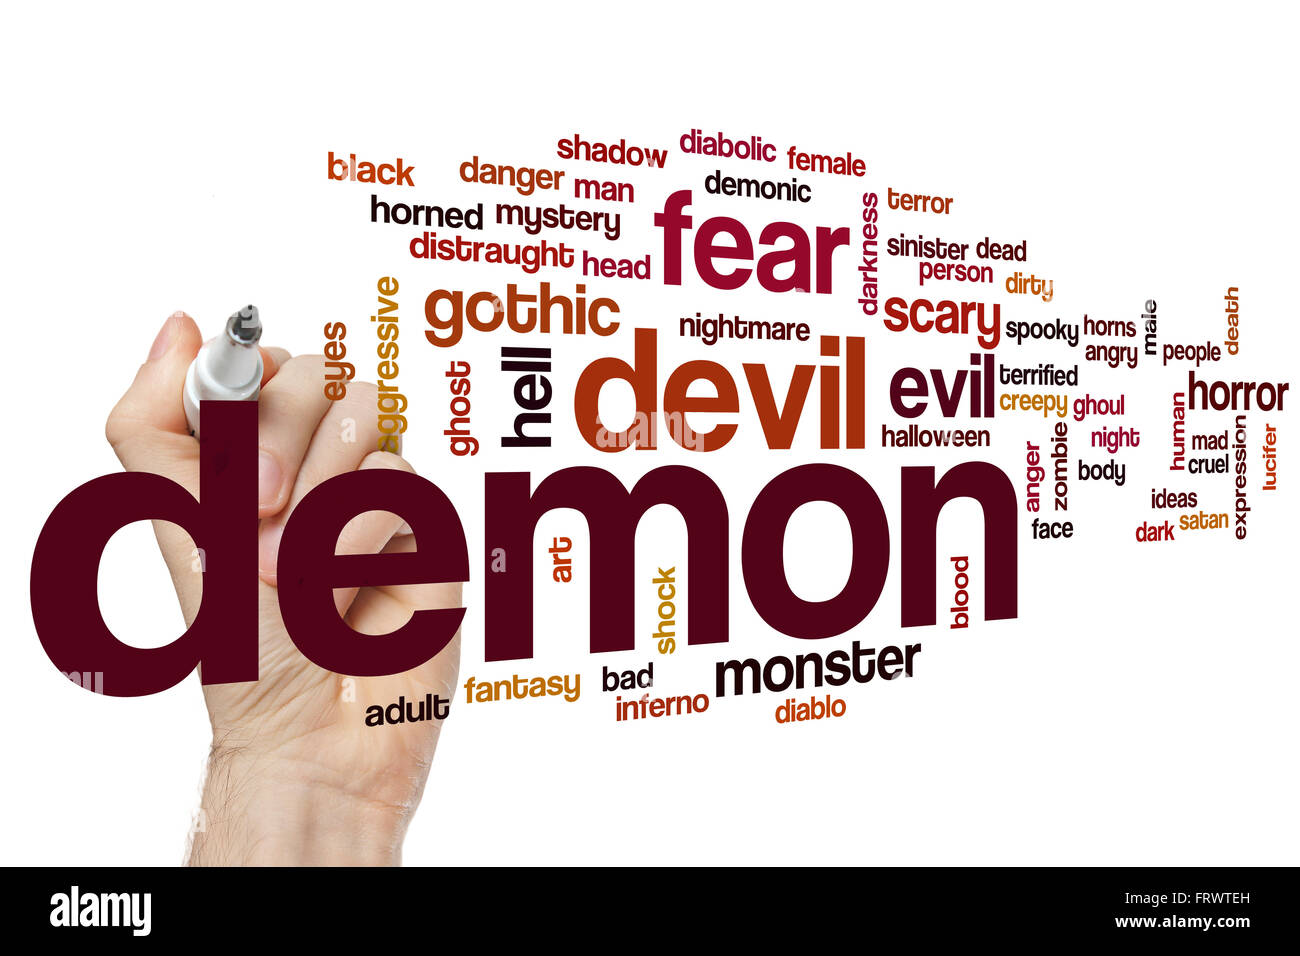 Demon word cloud concept with evil fear related tags Stock Photo